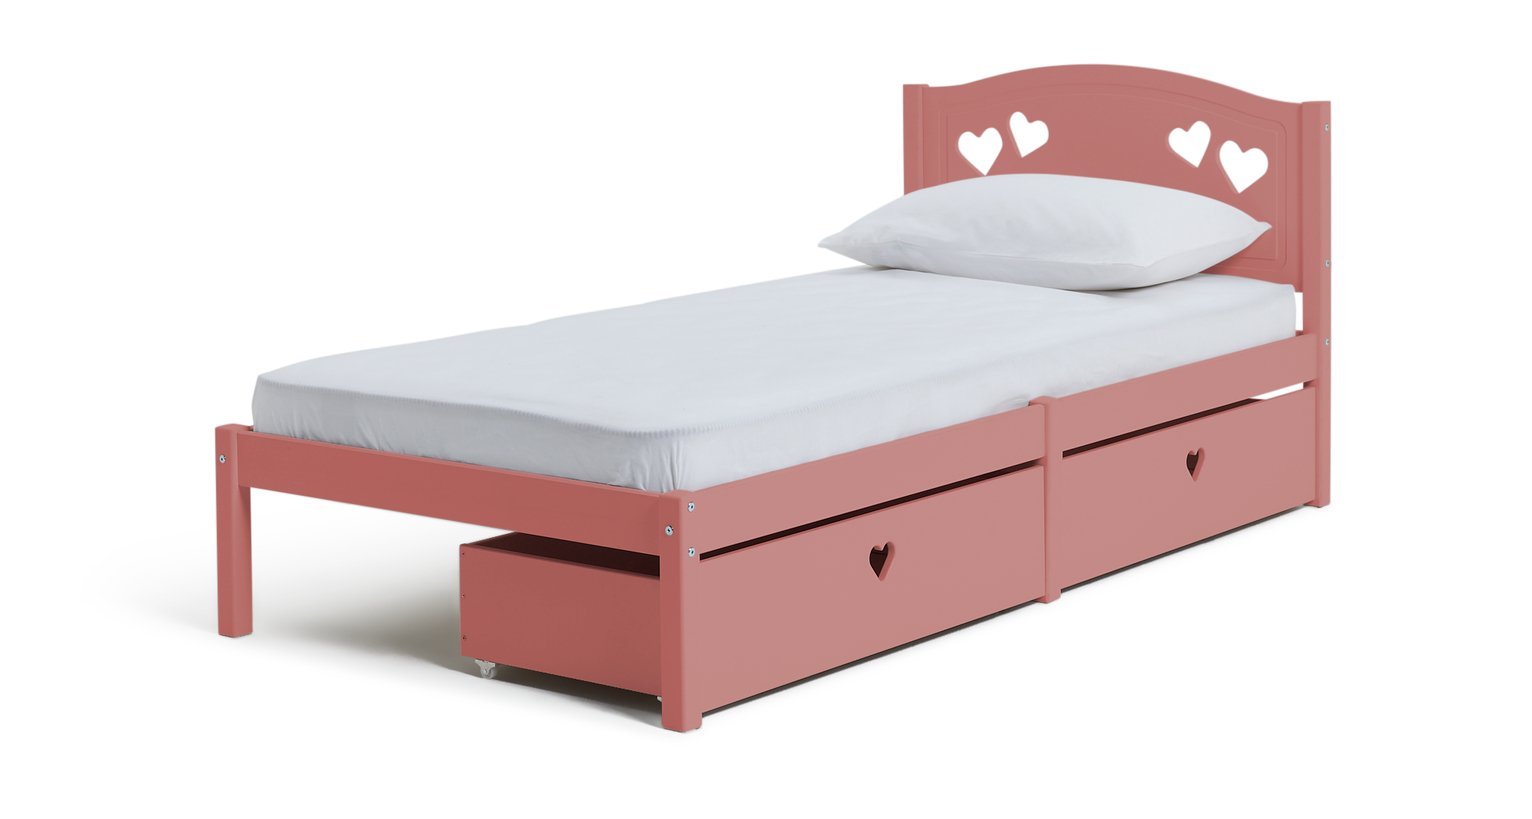 Habitat Mia Single Bed Frame With 2 Drawers - Pink